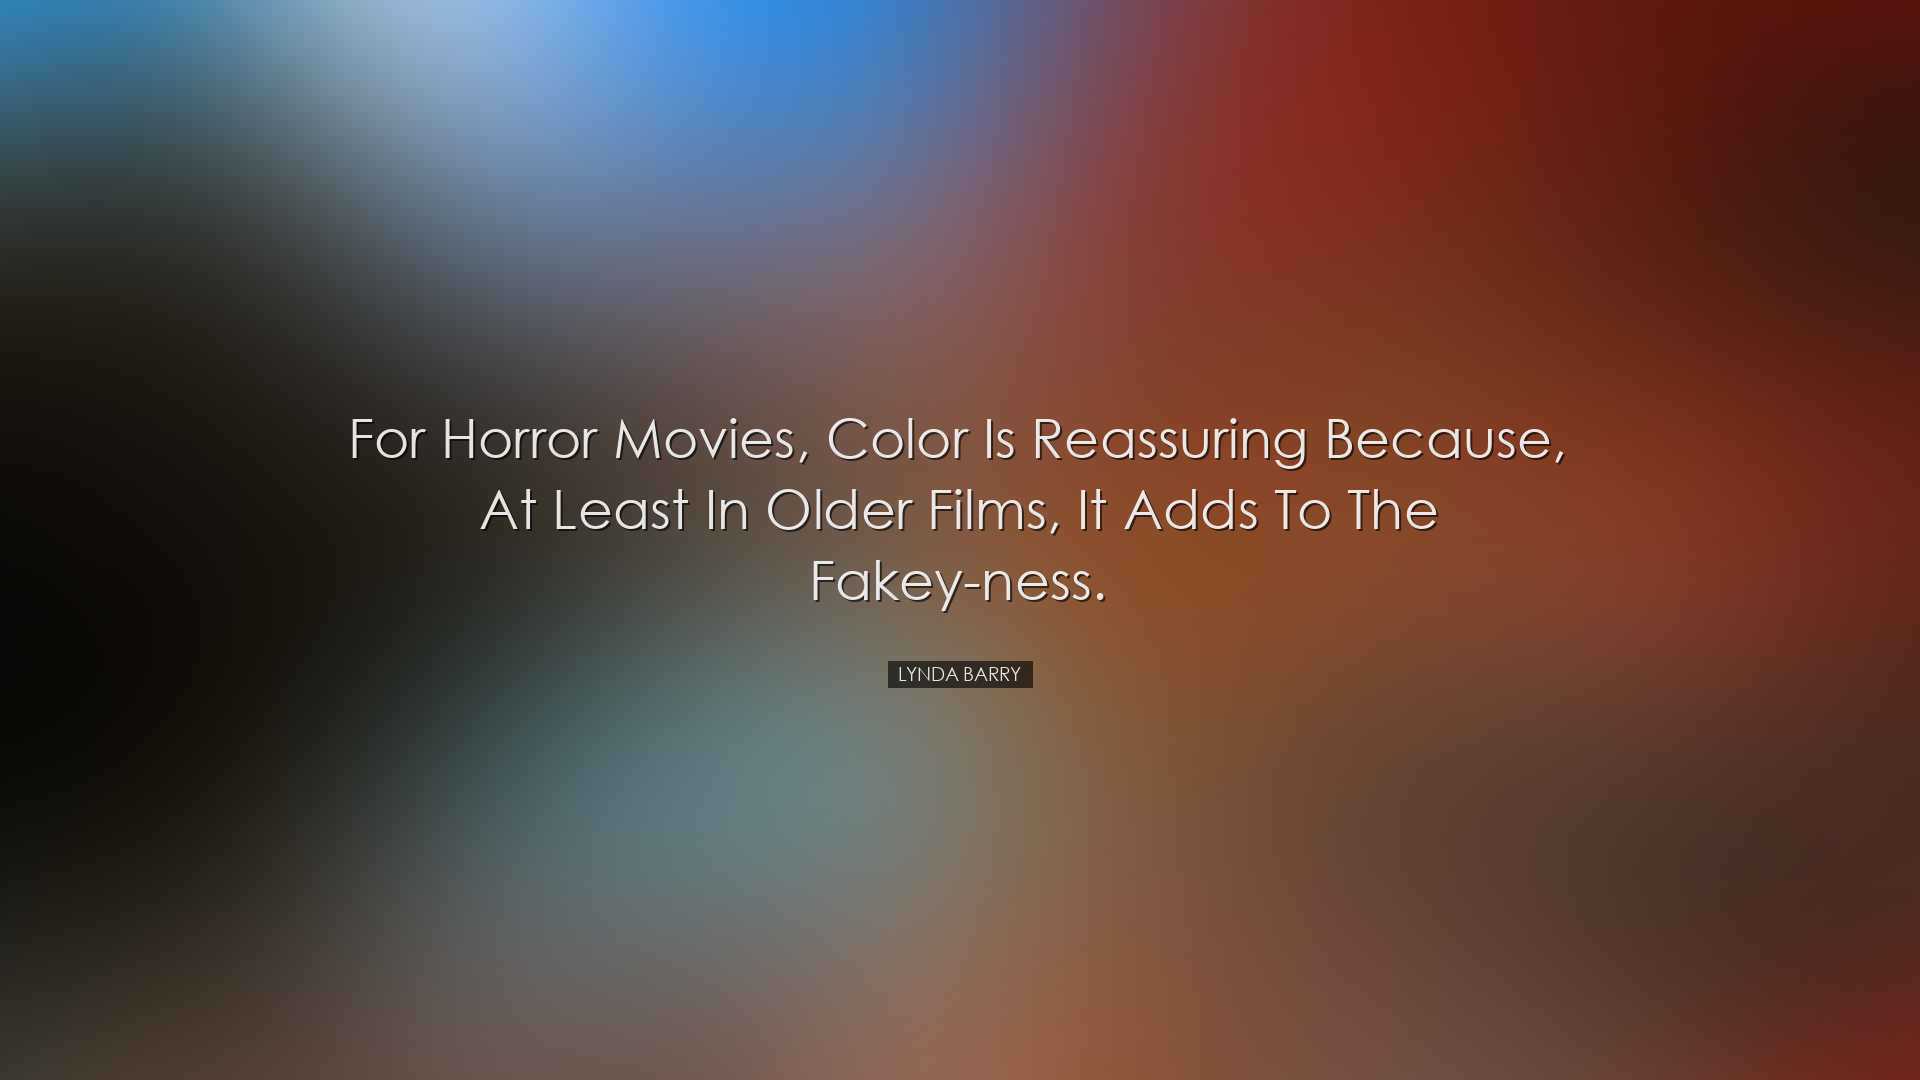 For horror movies, color is reassuring because, at least in older